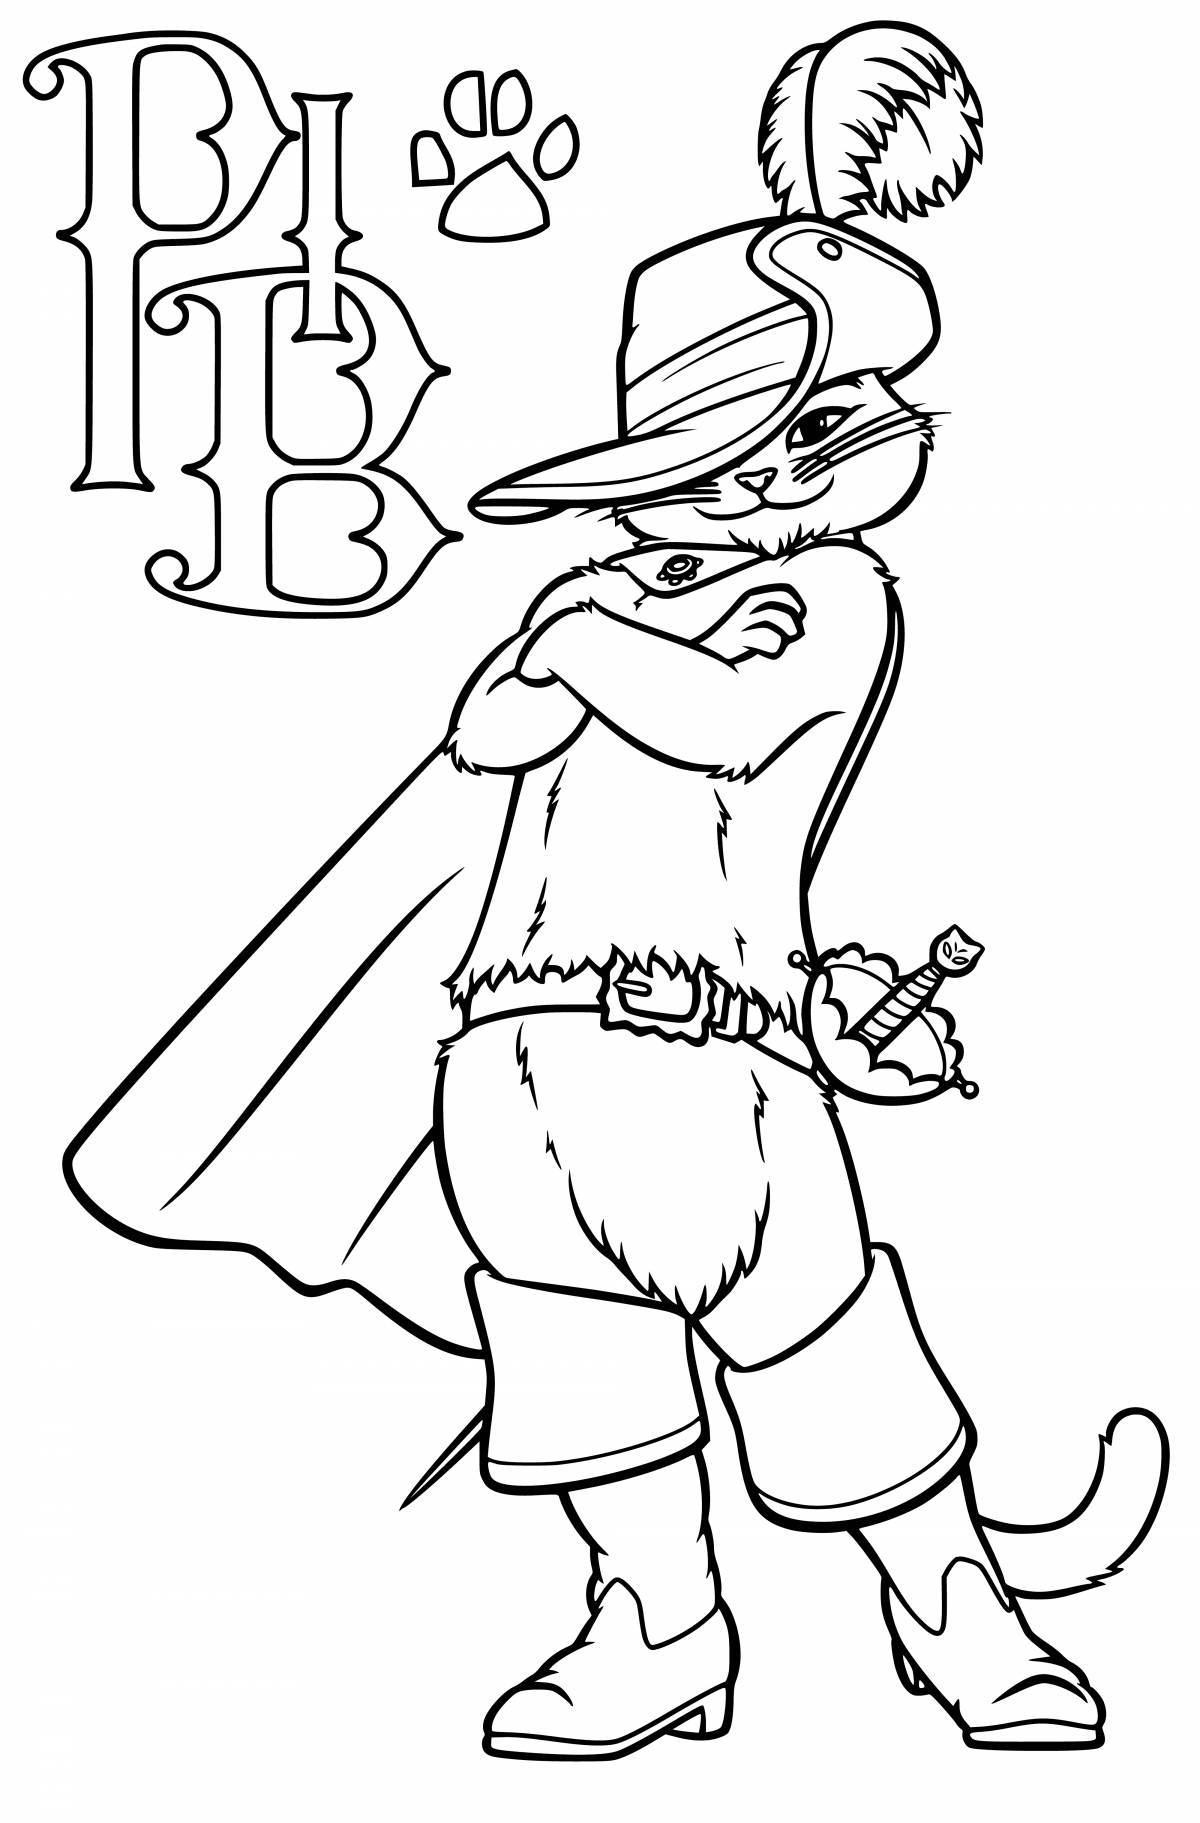 Cute cat in boots coloring pages for kids